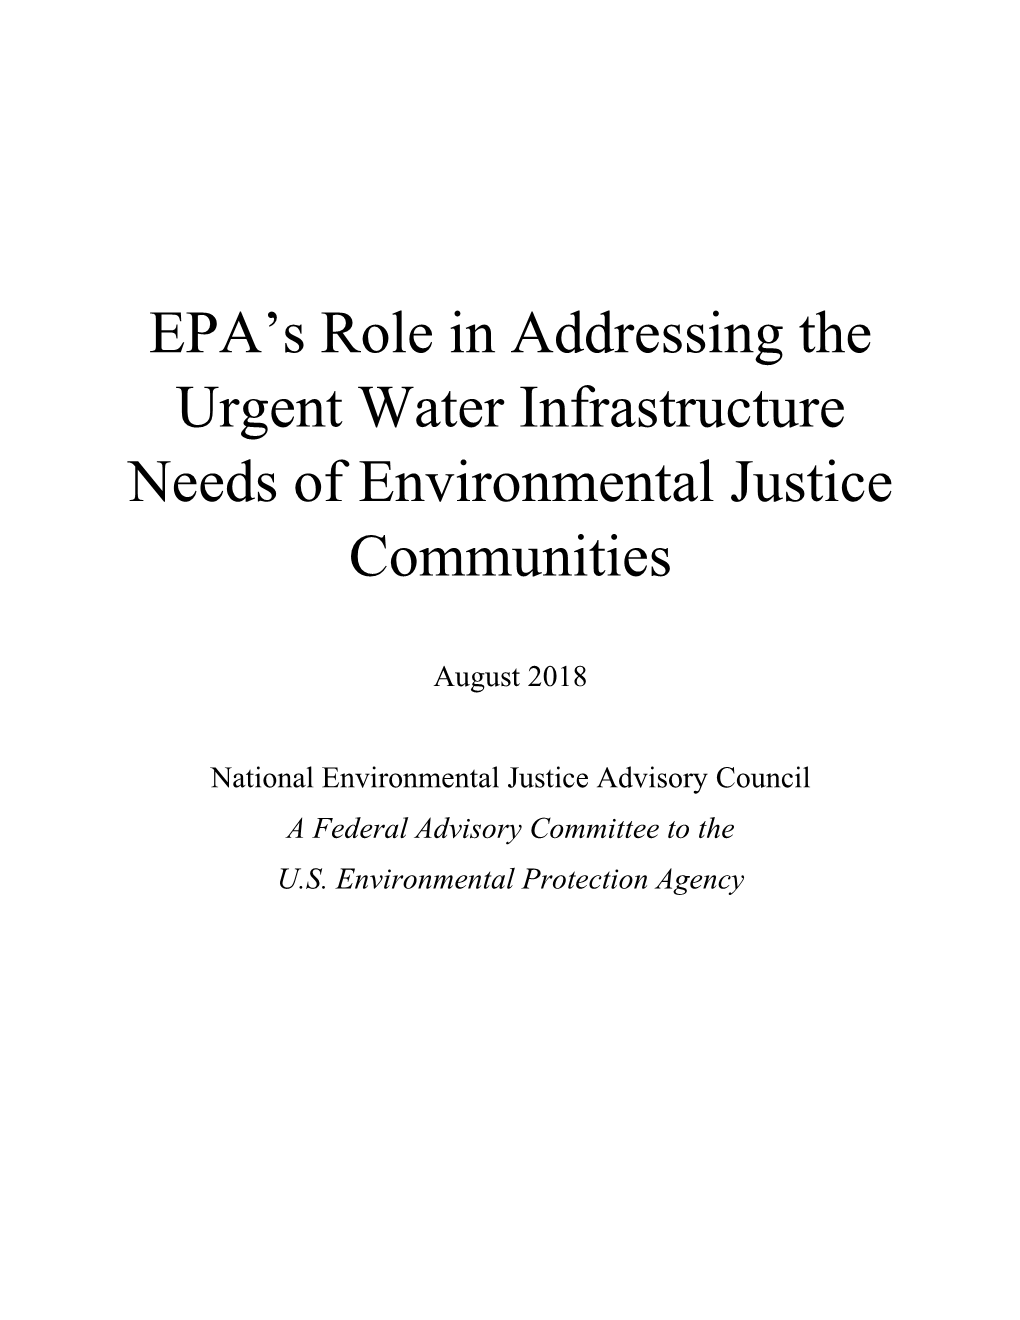 EPA's Role in Addressing the Urgent Water Infrastructure Needs of Environmental Justice Communities